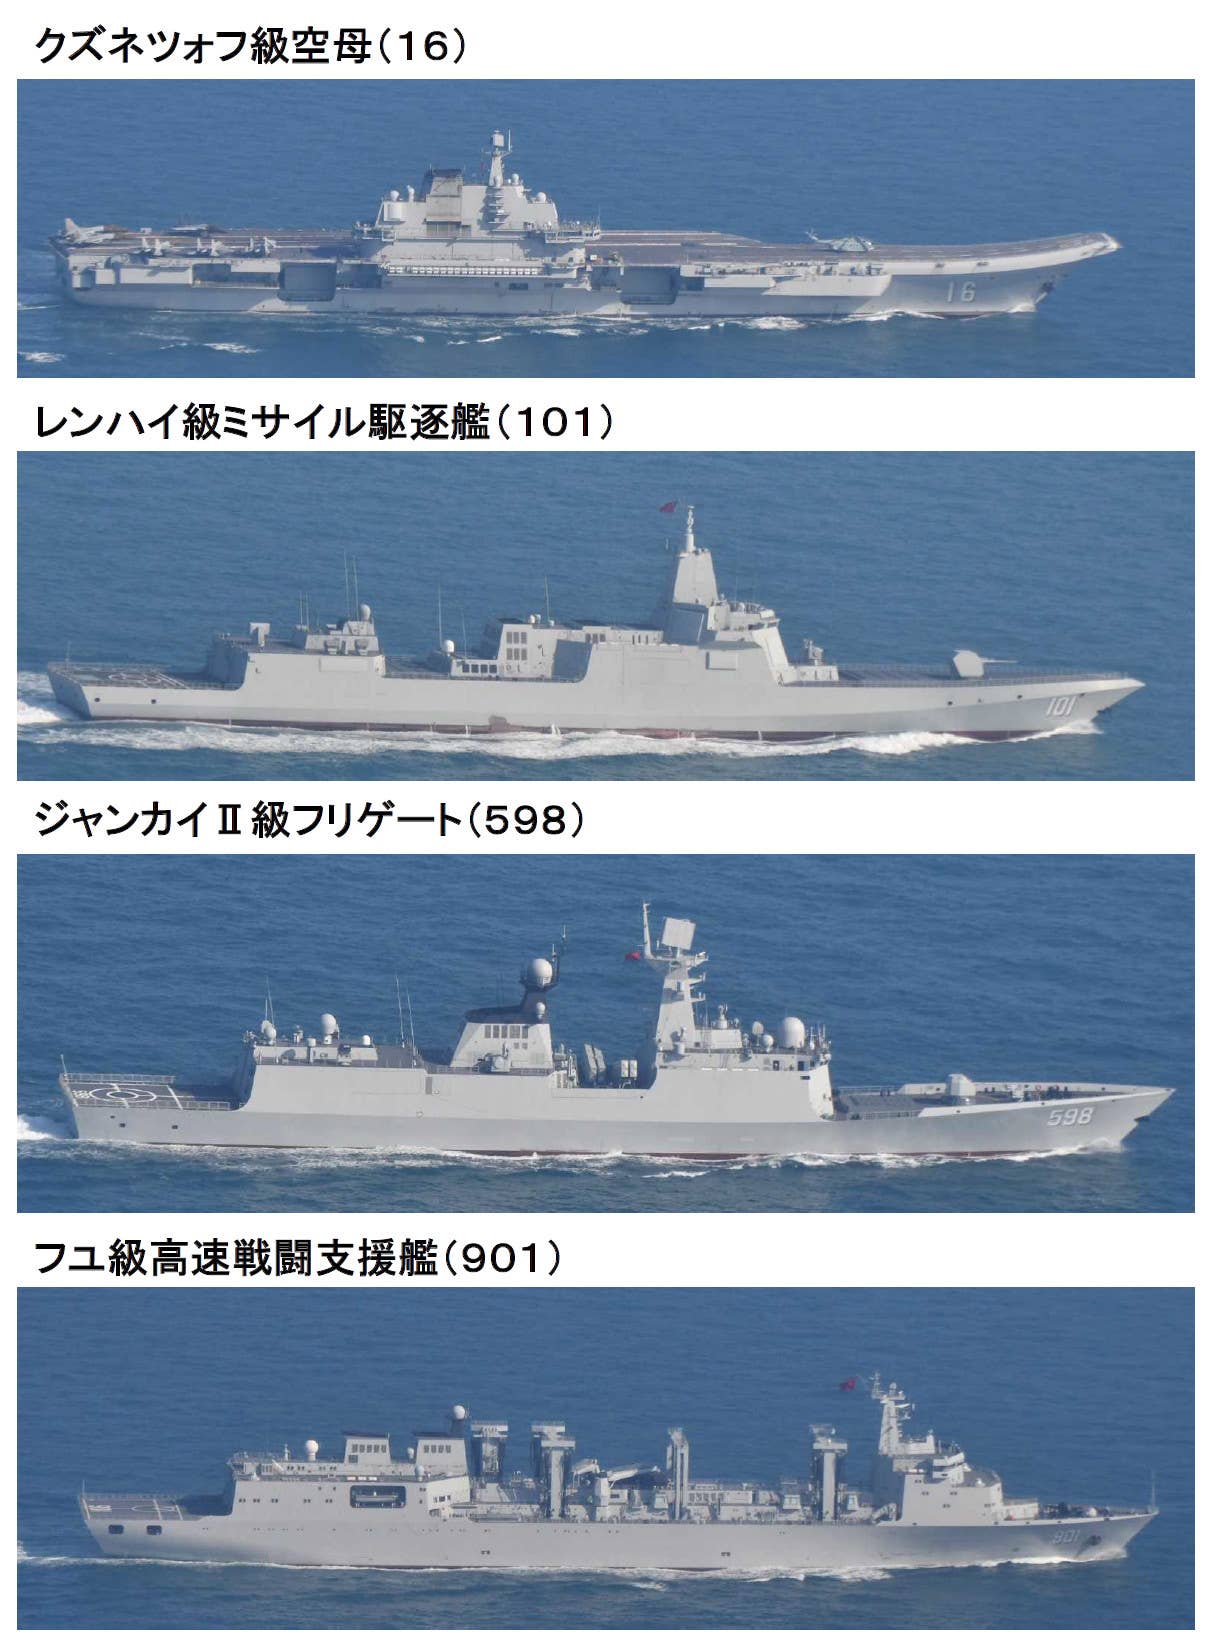 message-editor%2F1640885967720-chinese-ships.jpg